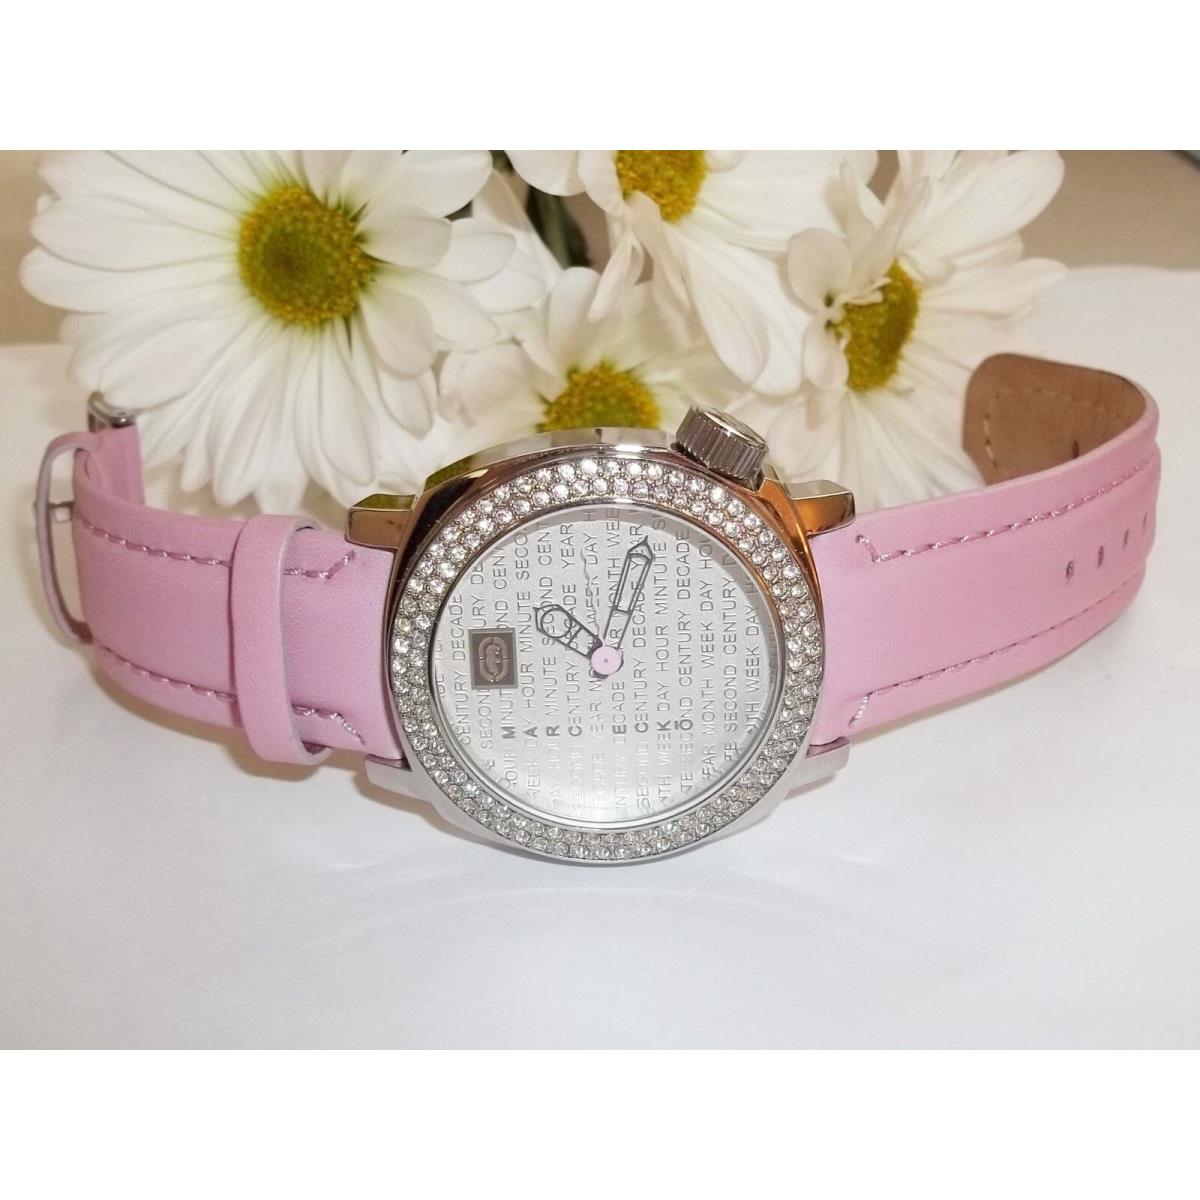 Marc Ecko Ladies Watch E95012L1 Pave Crystal Bezel Pink Leather Band